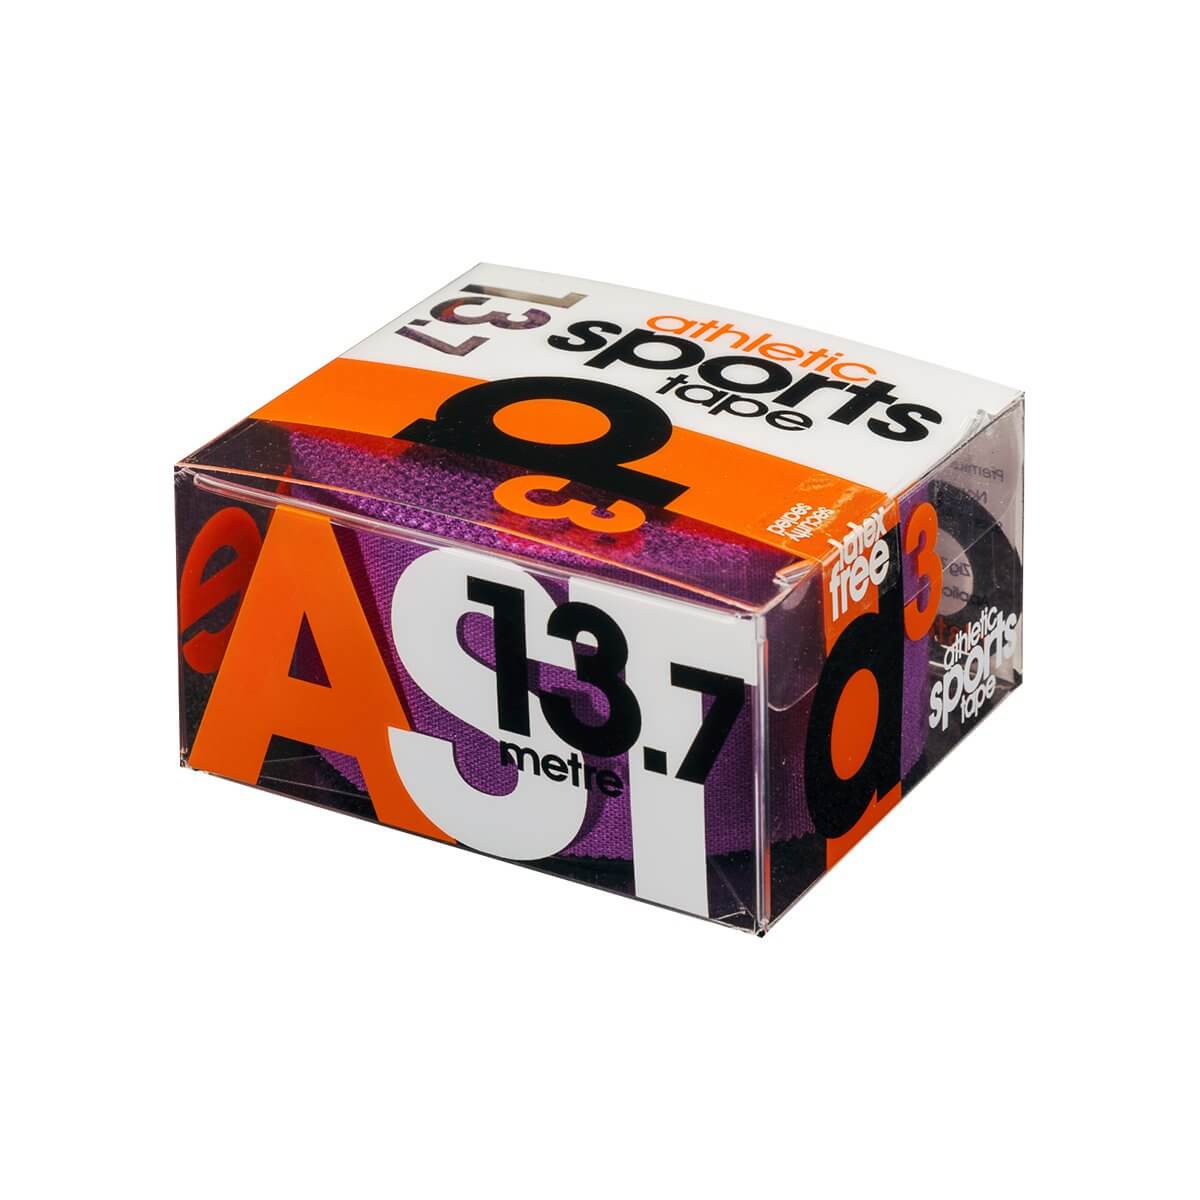 AST - Athletic Sports Tape 1.5 inches x 15 yrds.